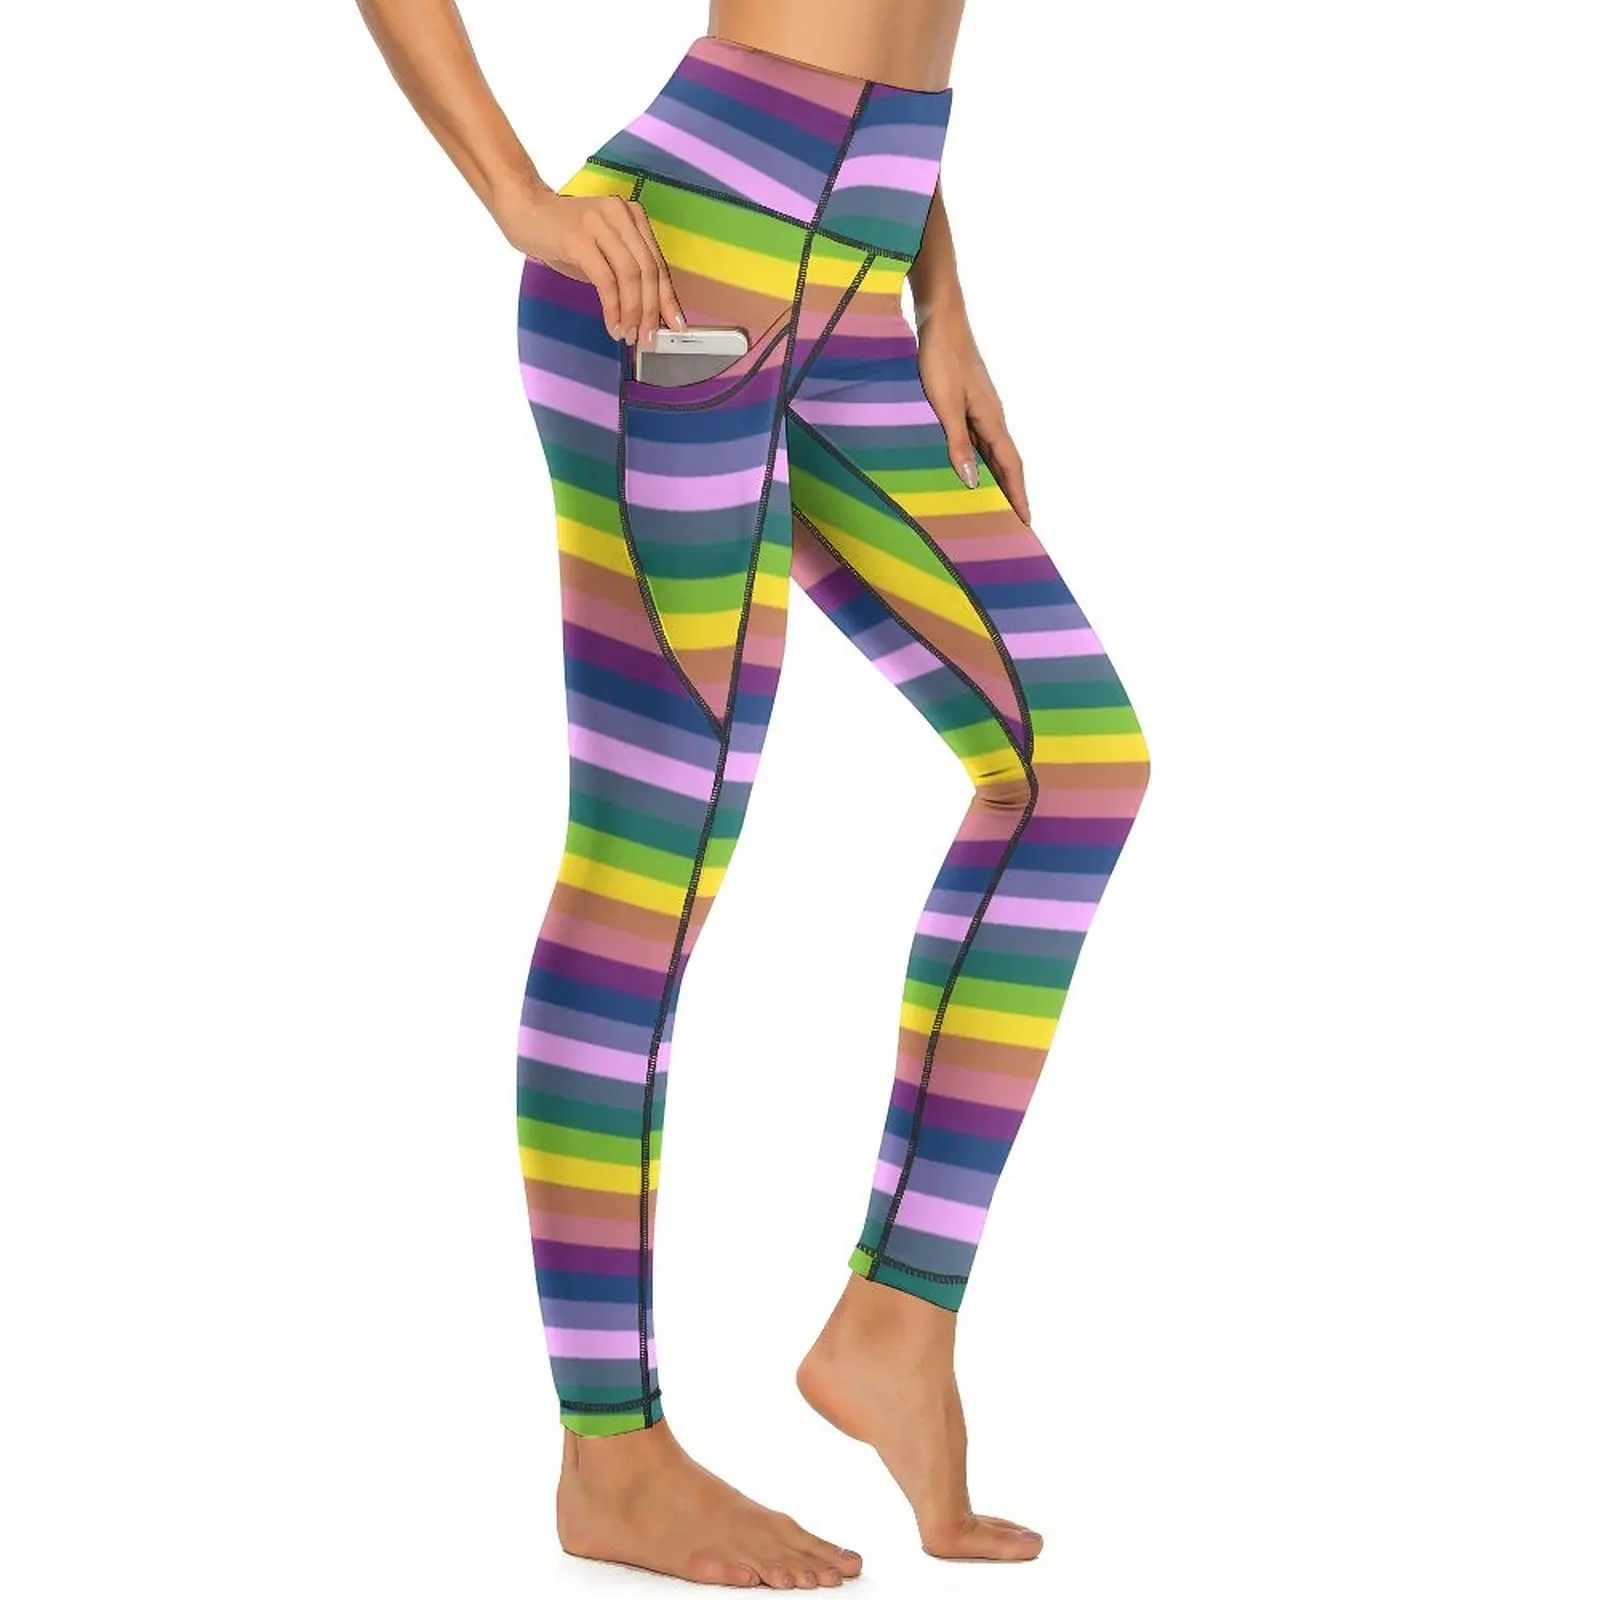 

80S Stripes Leggings Sexy Colorful Stripe Line Pattern Push Up Yoga Pants Novelty Quick-Dry Leggins Graphic Fitness Sport Tights